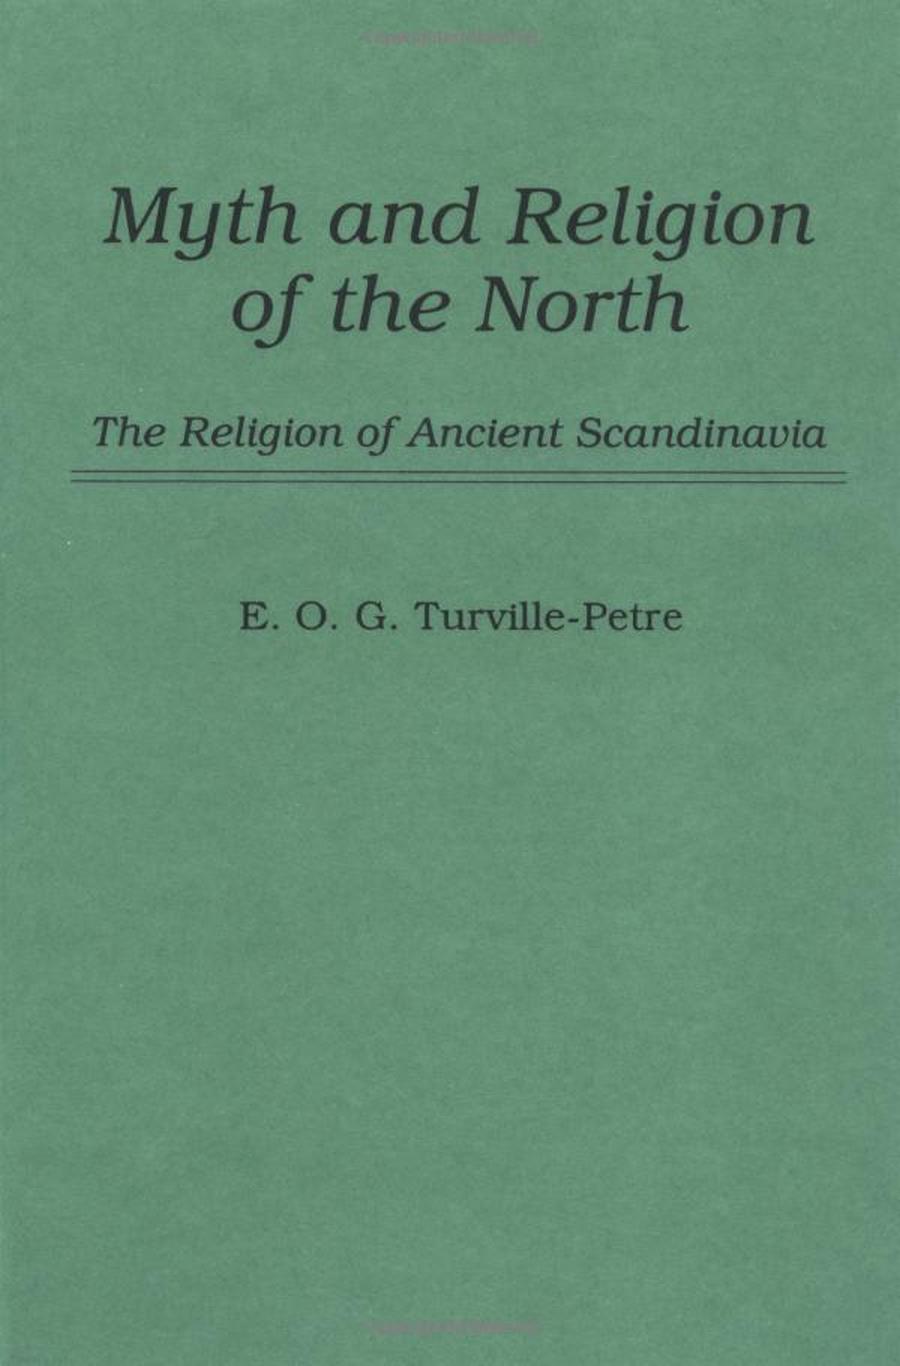 Myth and Religion of the North – E. O. G. Turville-Petre